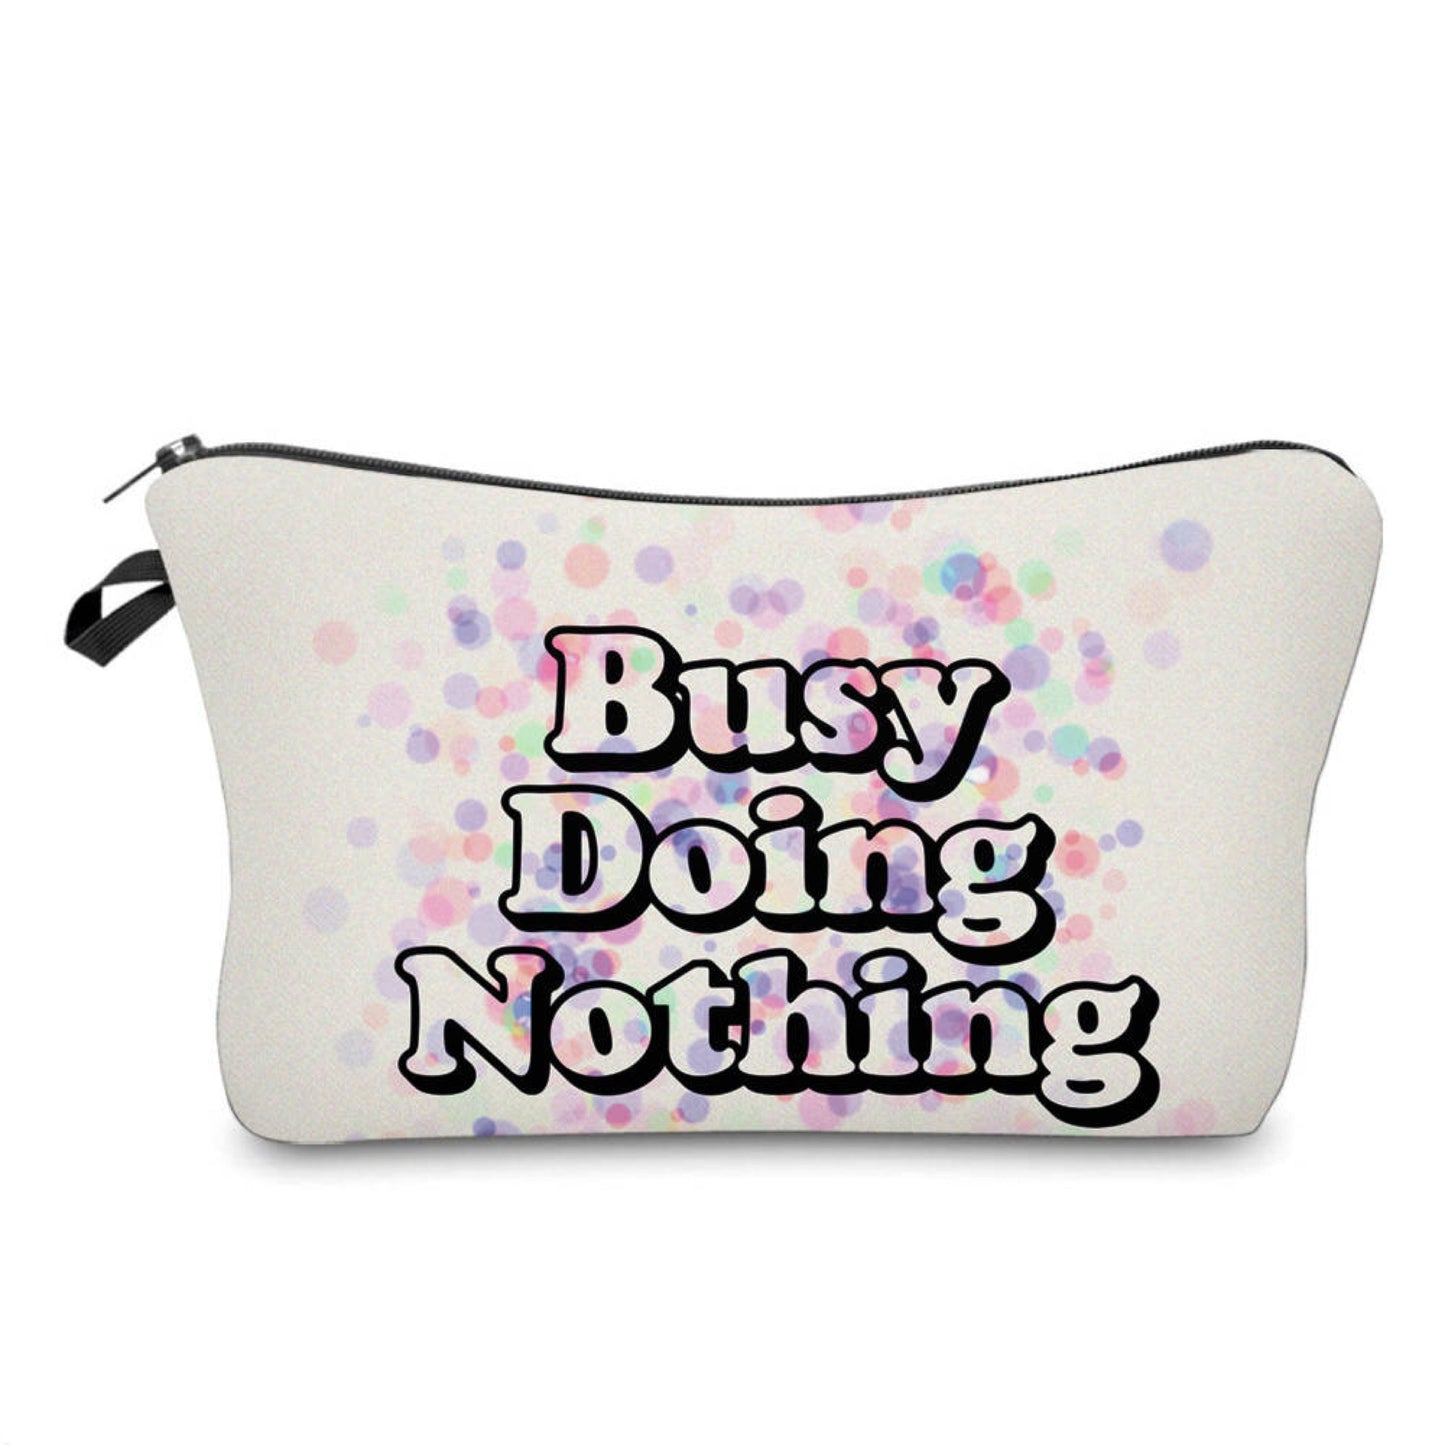 Busy Doing Nothing - Water-Resistant Multi-Use Pouch